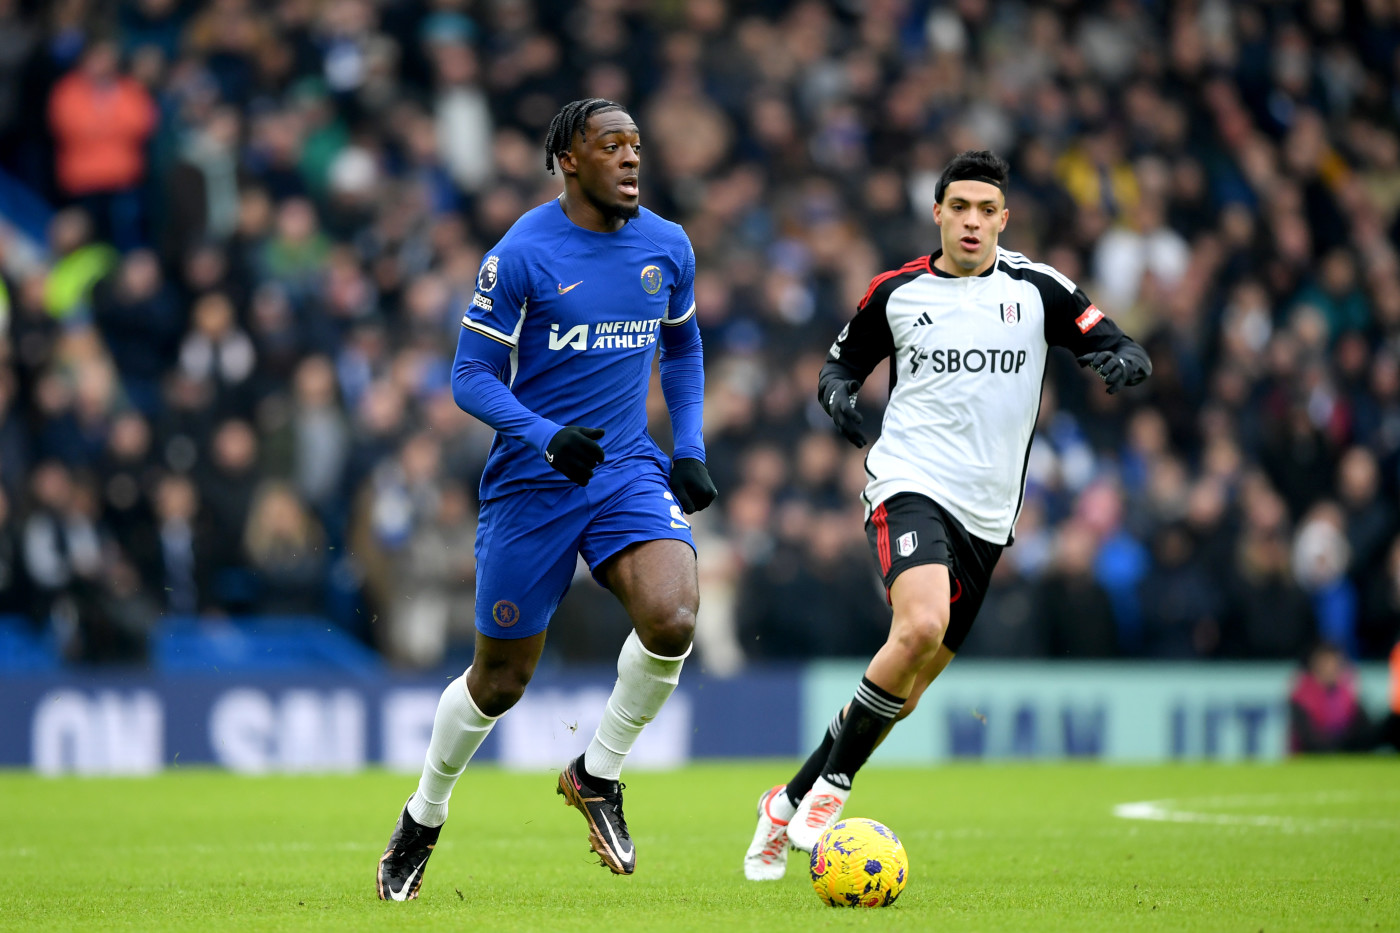 Chelsea star Axel Disasi put in a strong shift against Fulham.